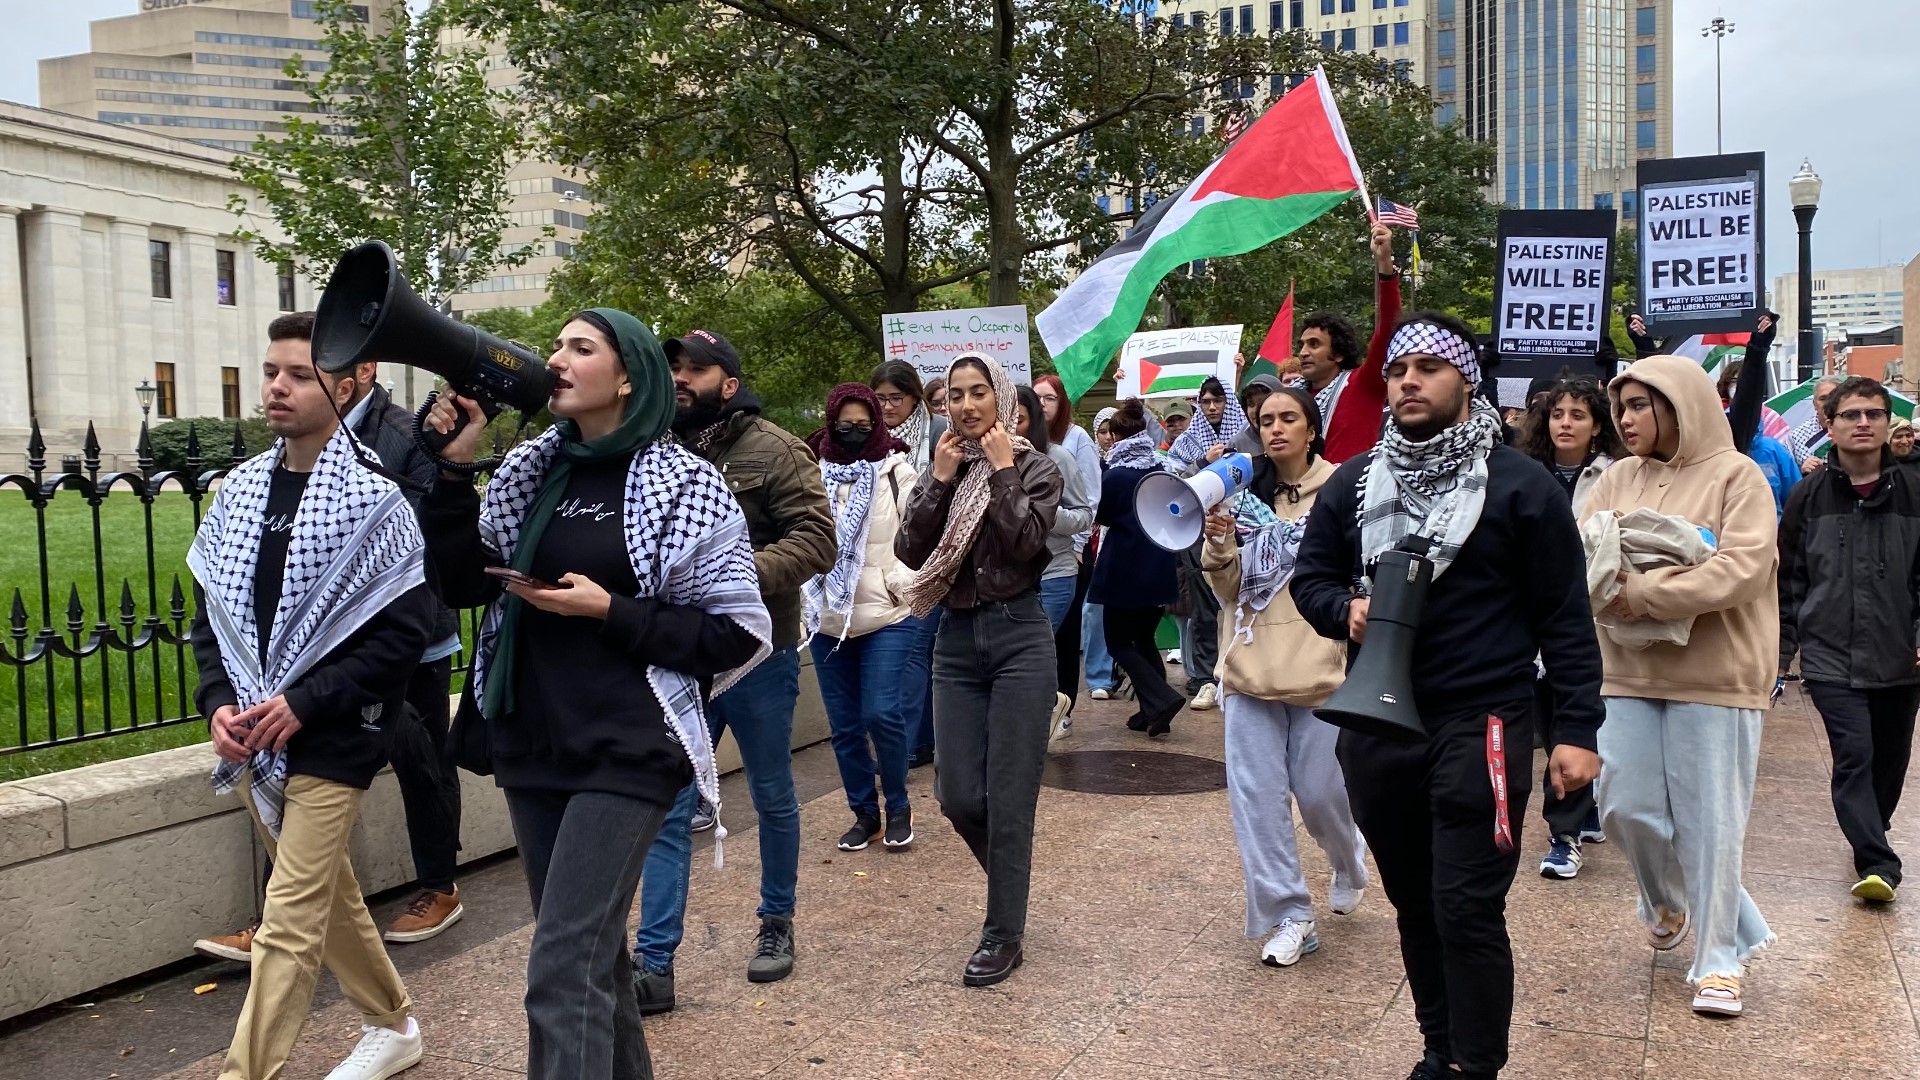 Nearly 100 students and community members gathered at the Statehouse Sunday afternoon in support of Palestinians.